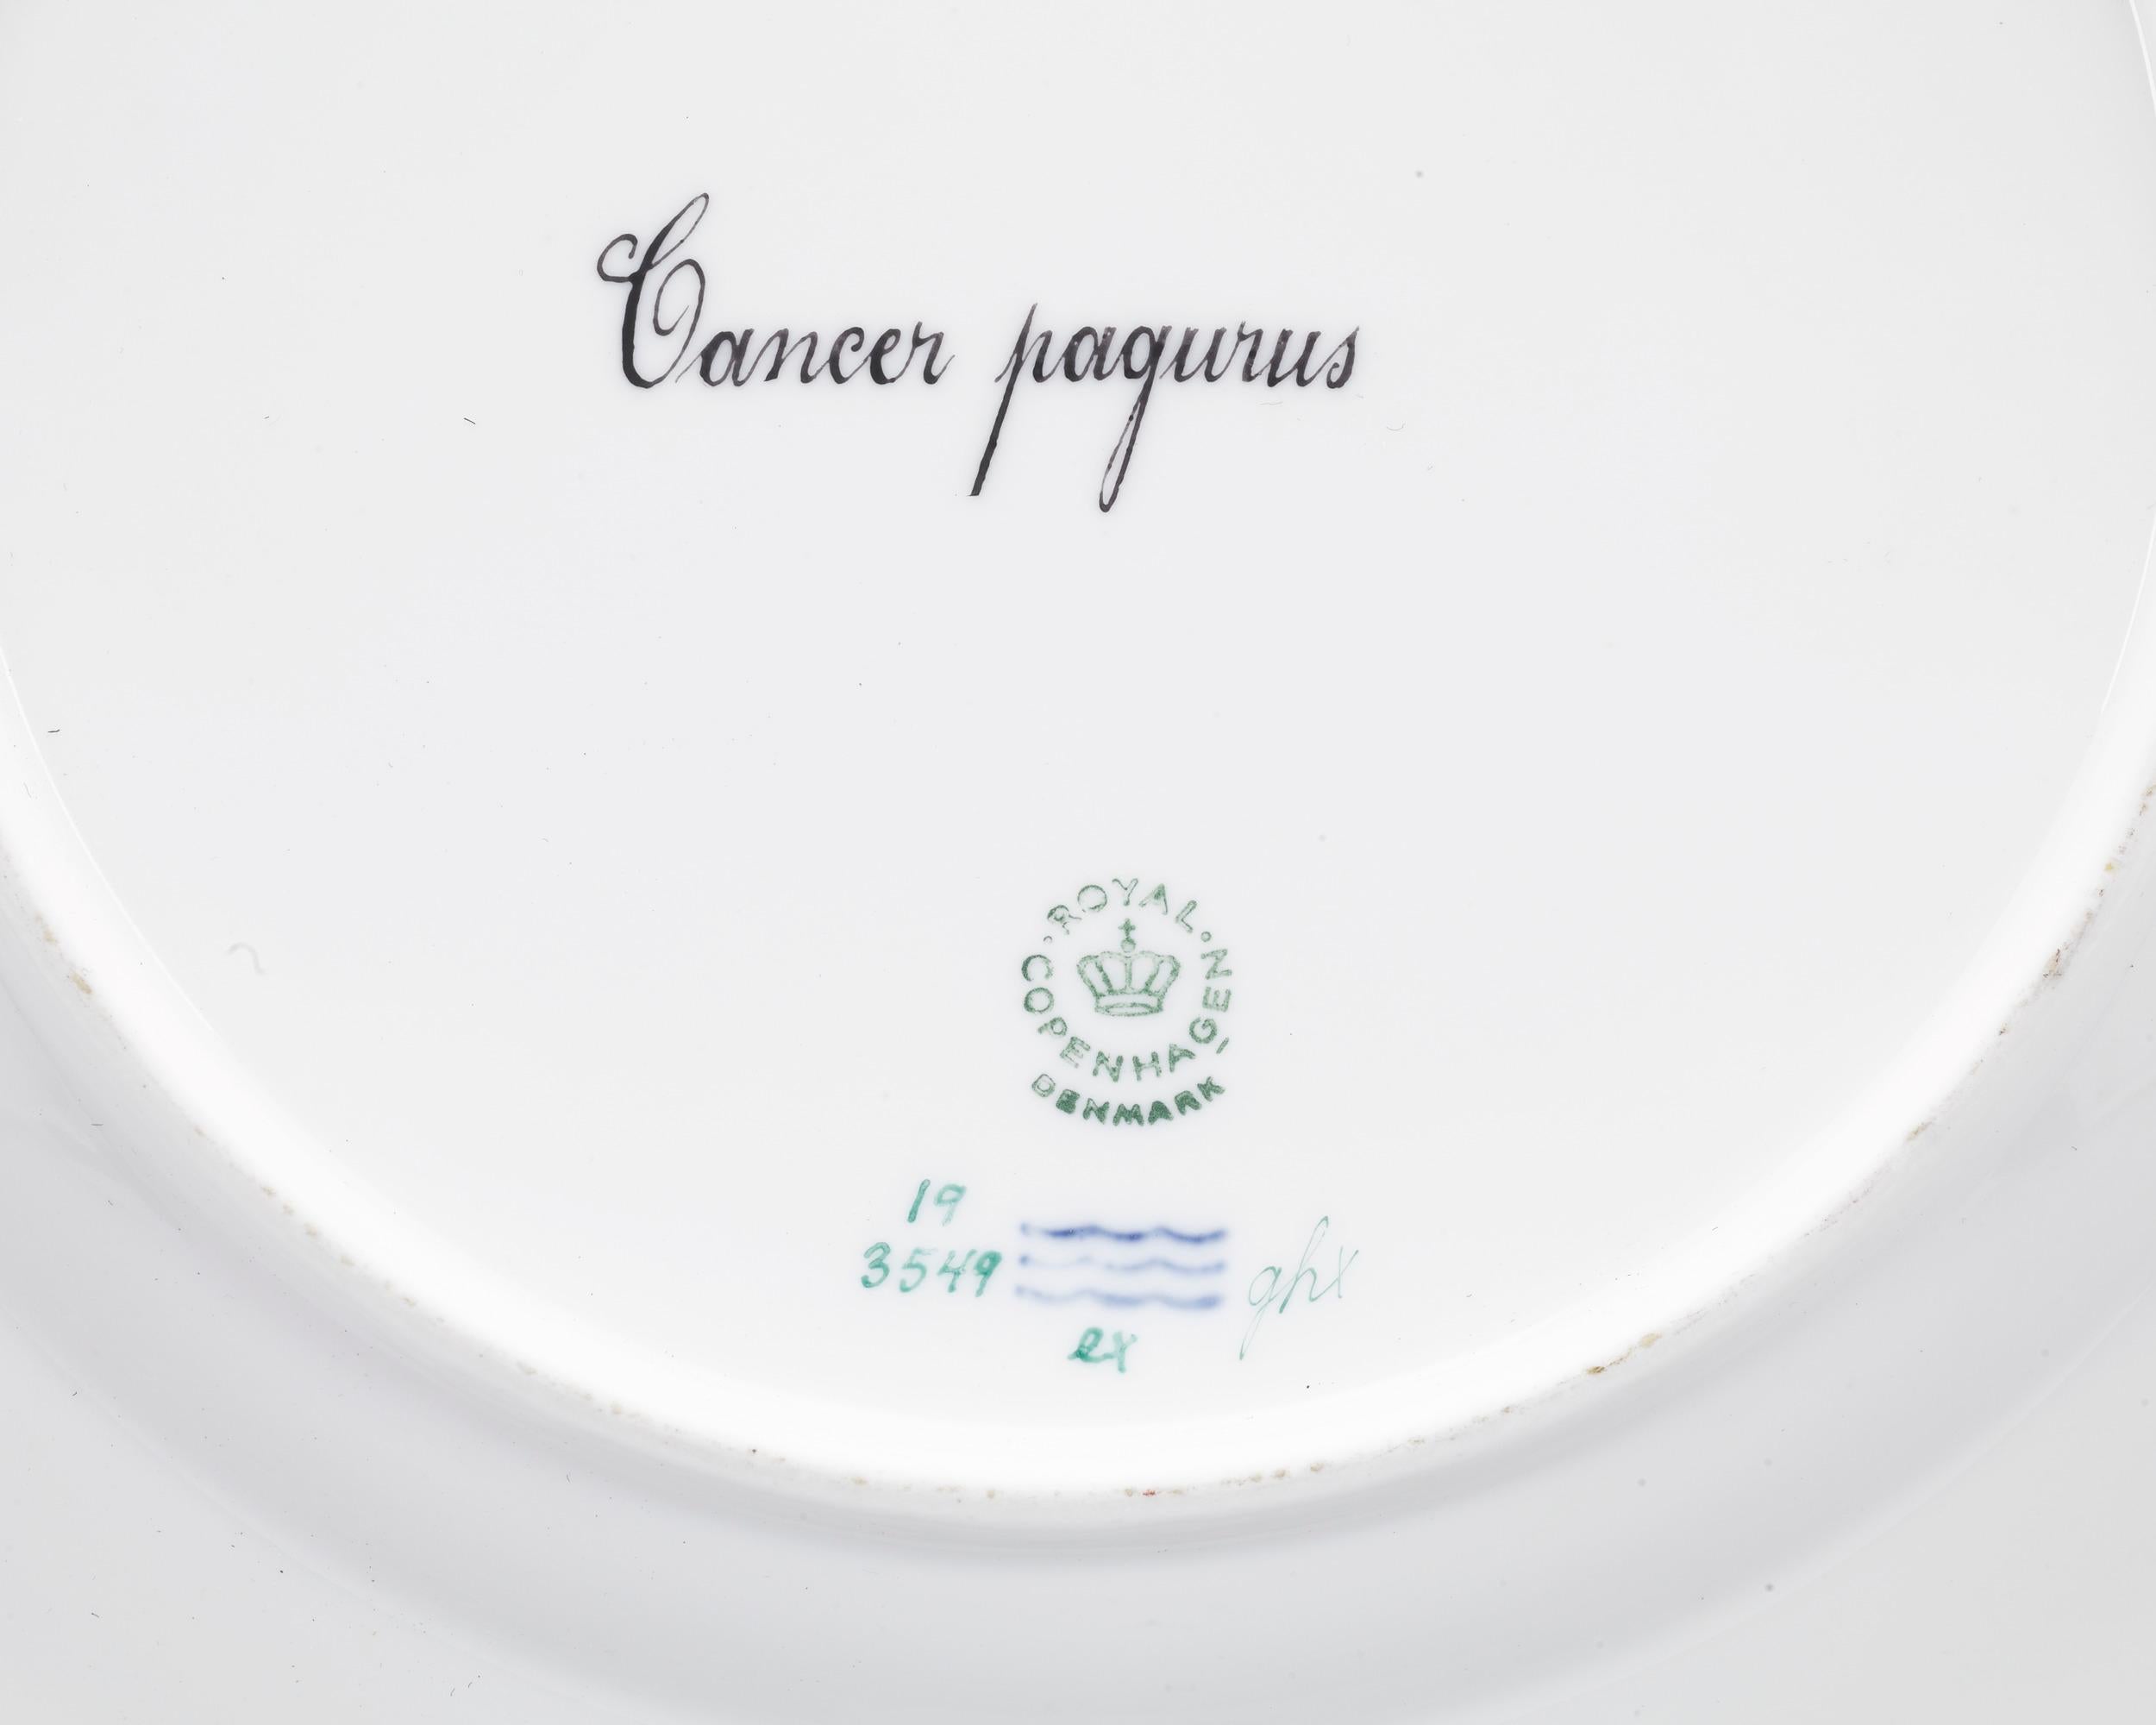 This impressive porcelain plate by Royal Copenhagen features the firm's famed Flora Danica motif. However, rather than the native flowers more typically used in Flora Danica porcelain, this plate is part of a rare subset of the pattern that captures